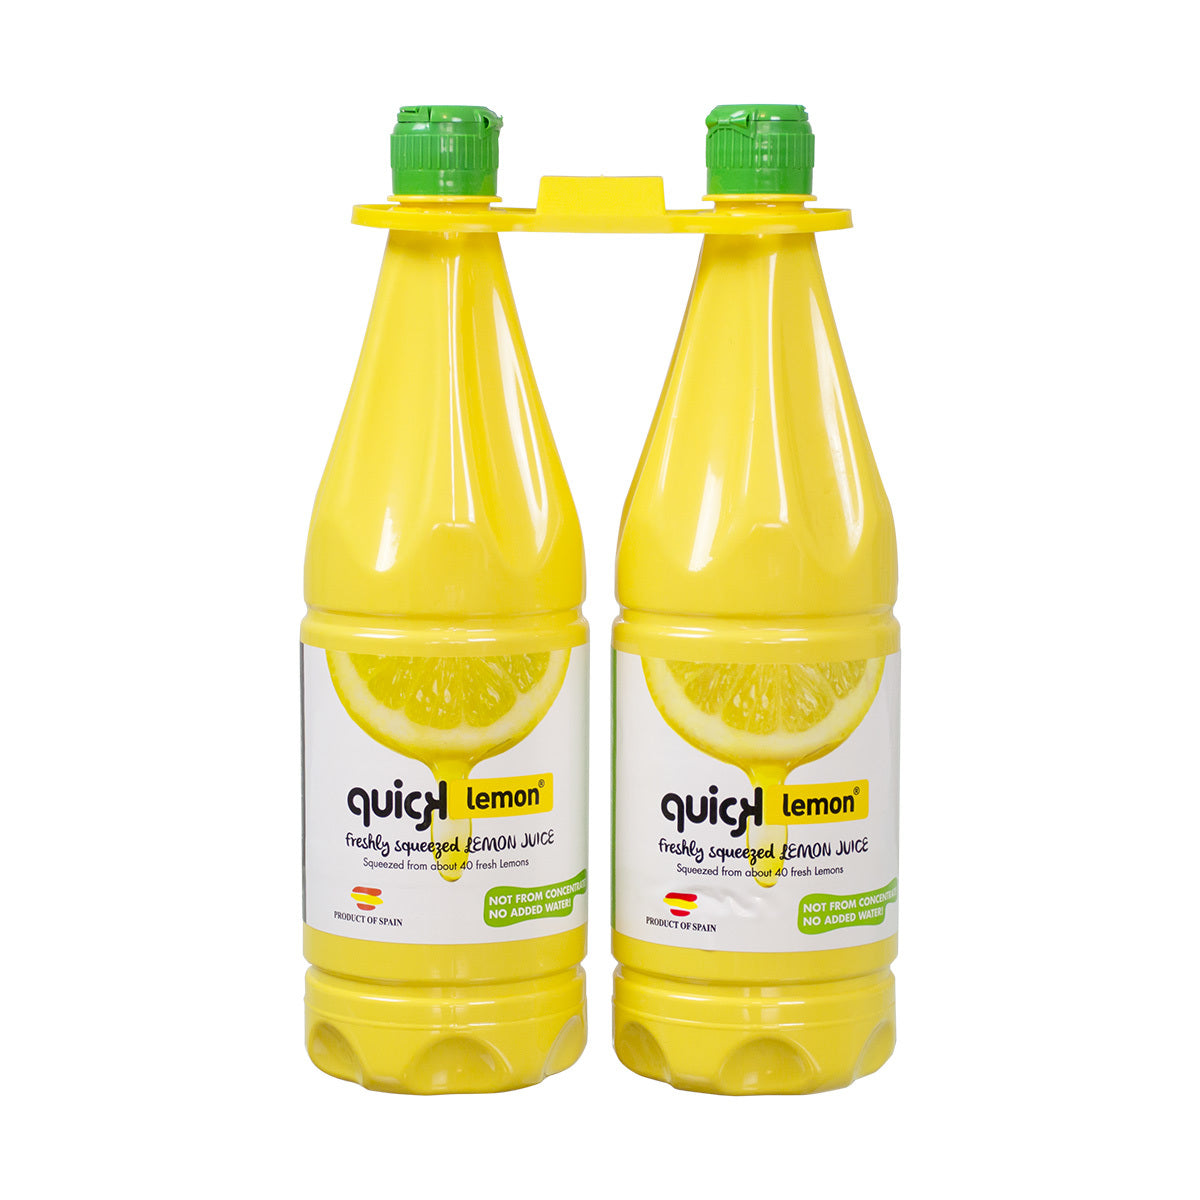 Quicklemon Juice Not from Concentrate, 2 x 1L Juice Costco UK   